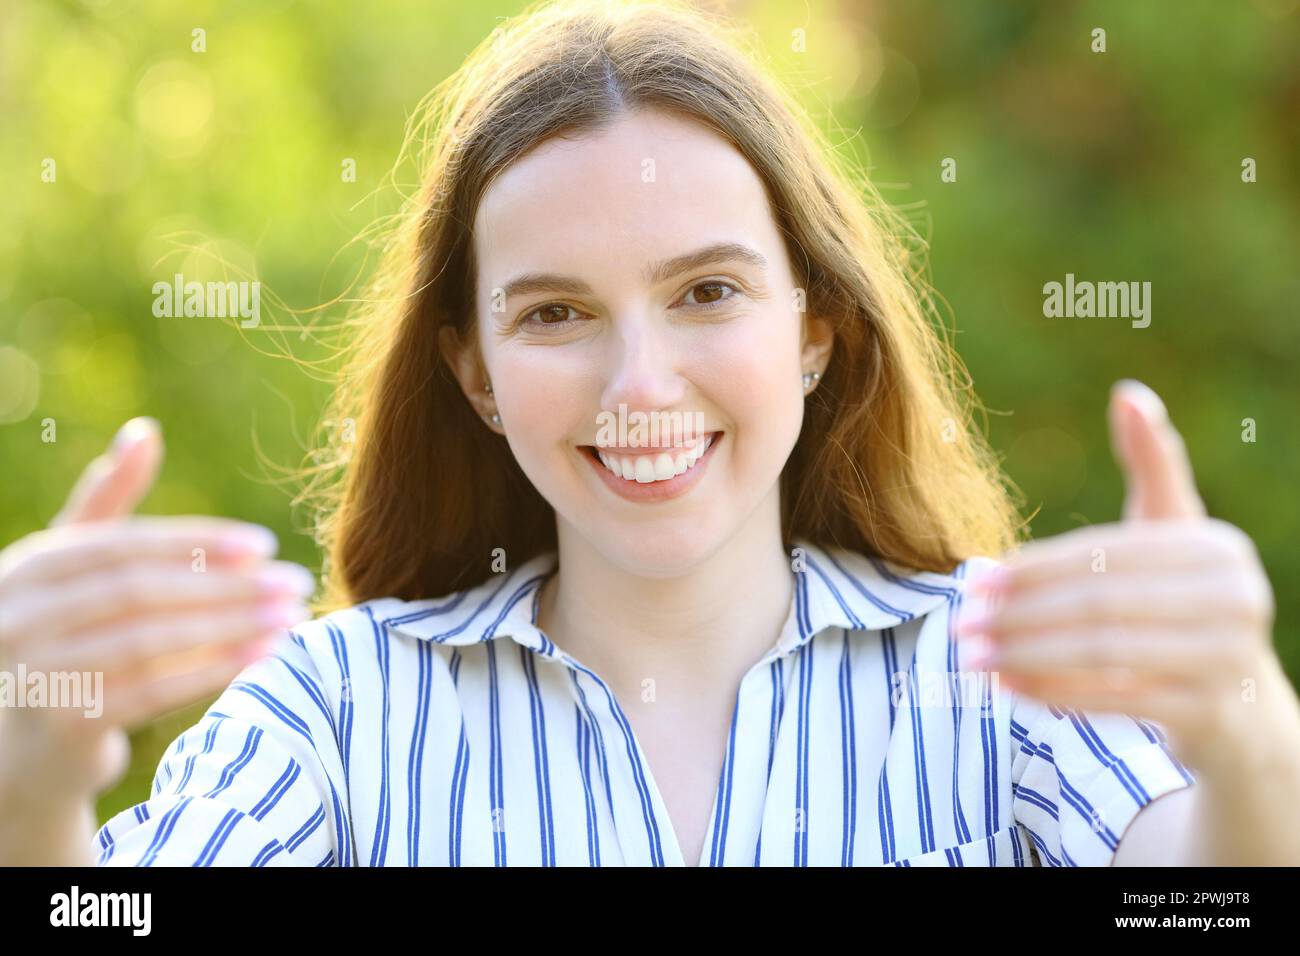 Front view portrait of a happy woman inviting to come in a park Stock Photo